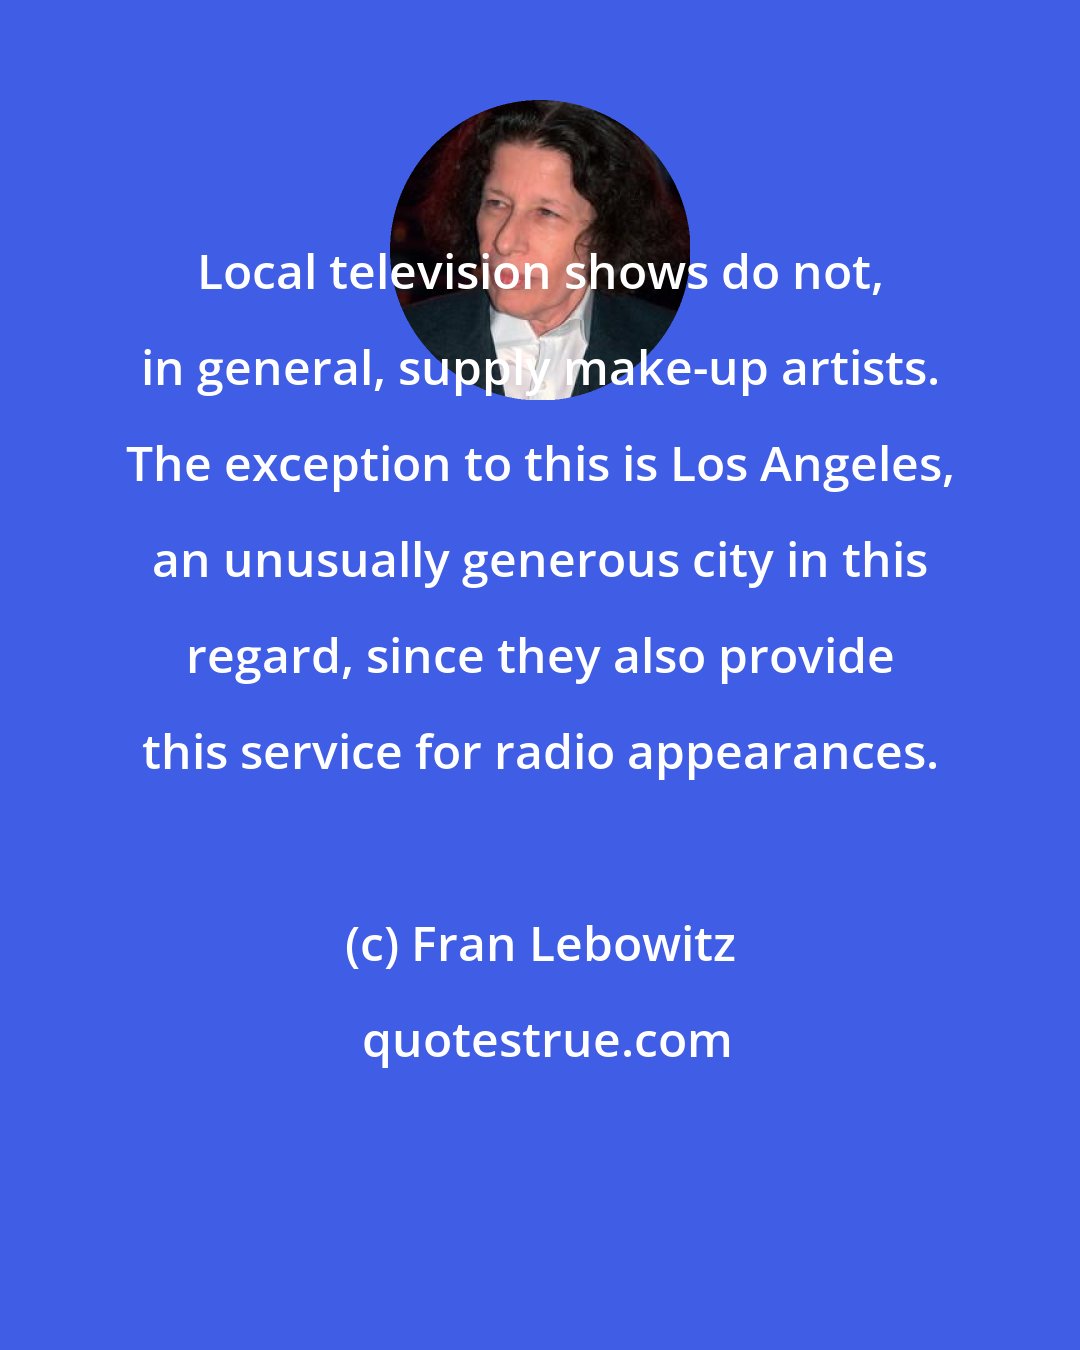 Fran Lebowitz: Local television shows do not, in general, supply make-up artists. The exception to this is Los Angeles, an unusually generous city in this regard, since they also provide this service for radio appearances.